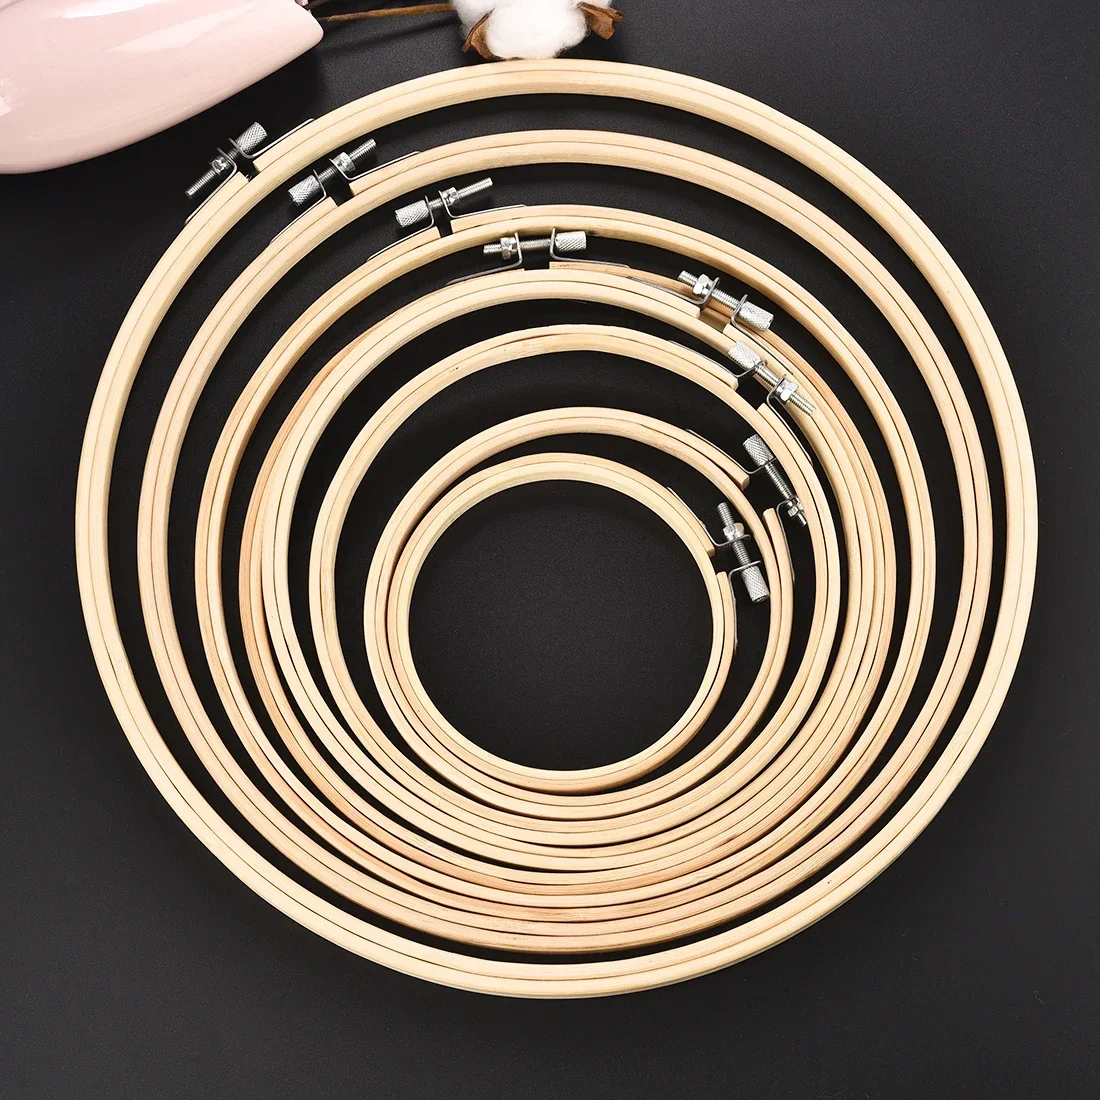 10x 20x Mini Embroidery Hoop Ring Wooden Cross Stitch Frame Handmade  Pendant Crafts Embroidery Circle Sewing Kit